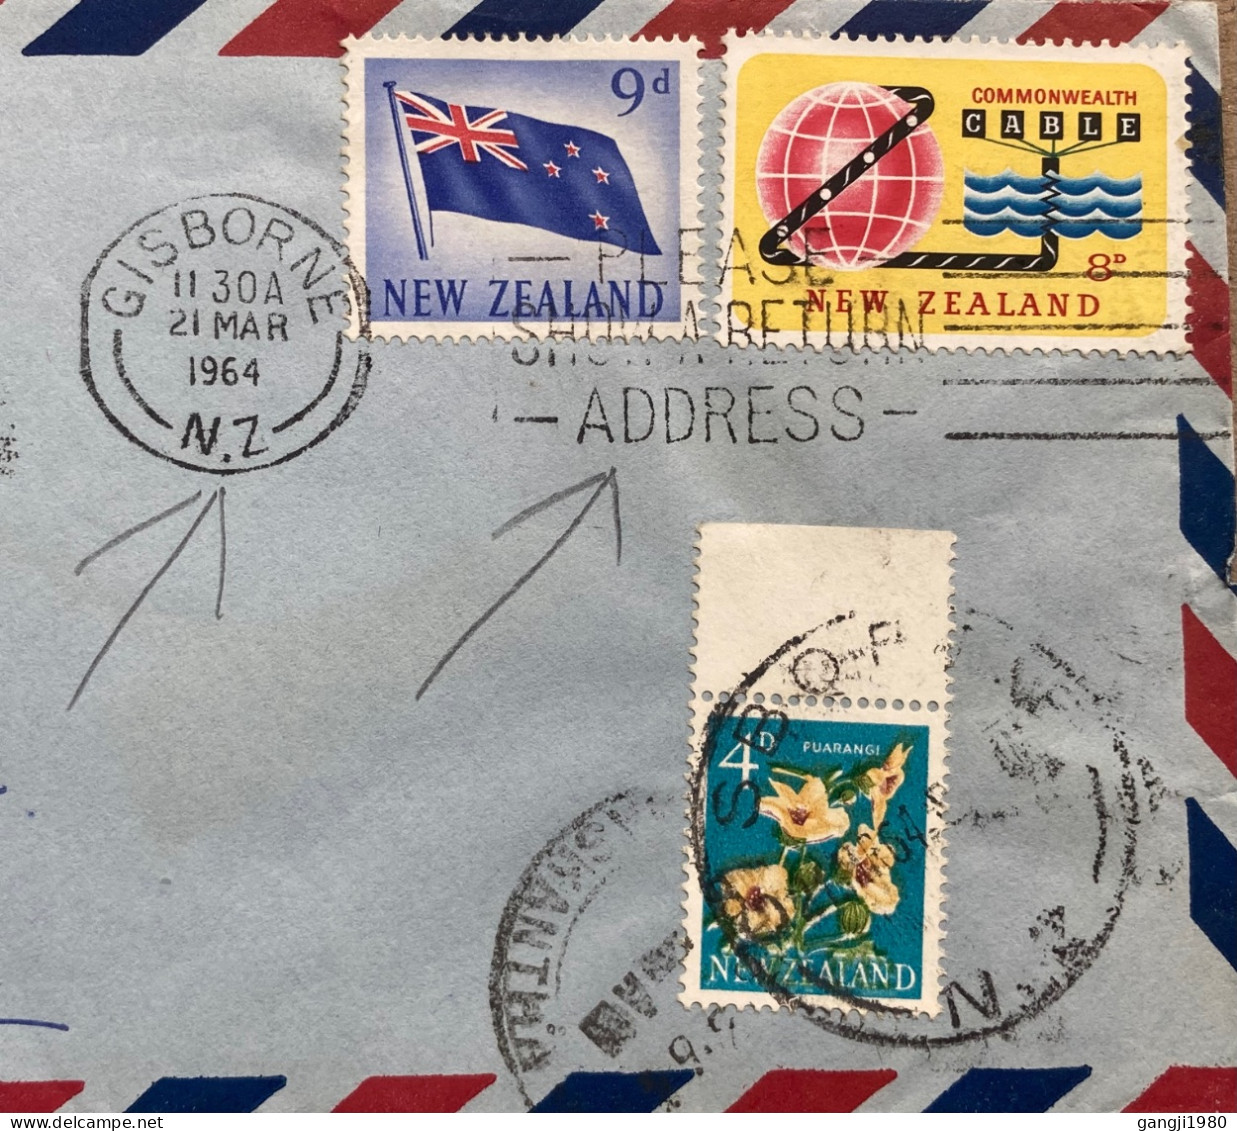 NEW-ZEALAND 1964, COVER USED TO INDIA, 3 DIFF STAMP, FLAG, CABLE, FLOWER, GISBORNE CITY SLOGAN, PLEASE SHOW RETURN ADDRE - Storia Postale